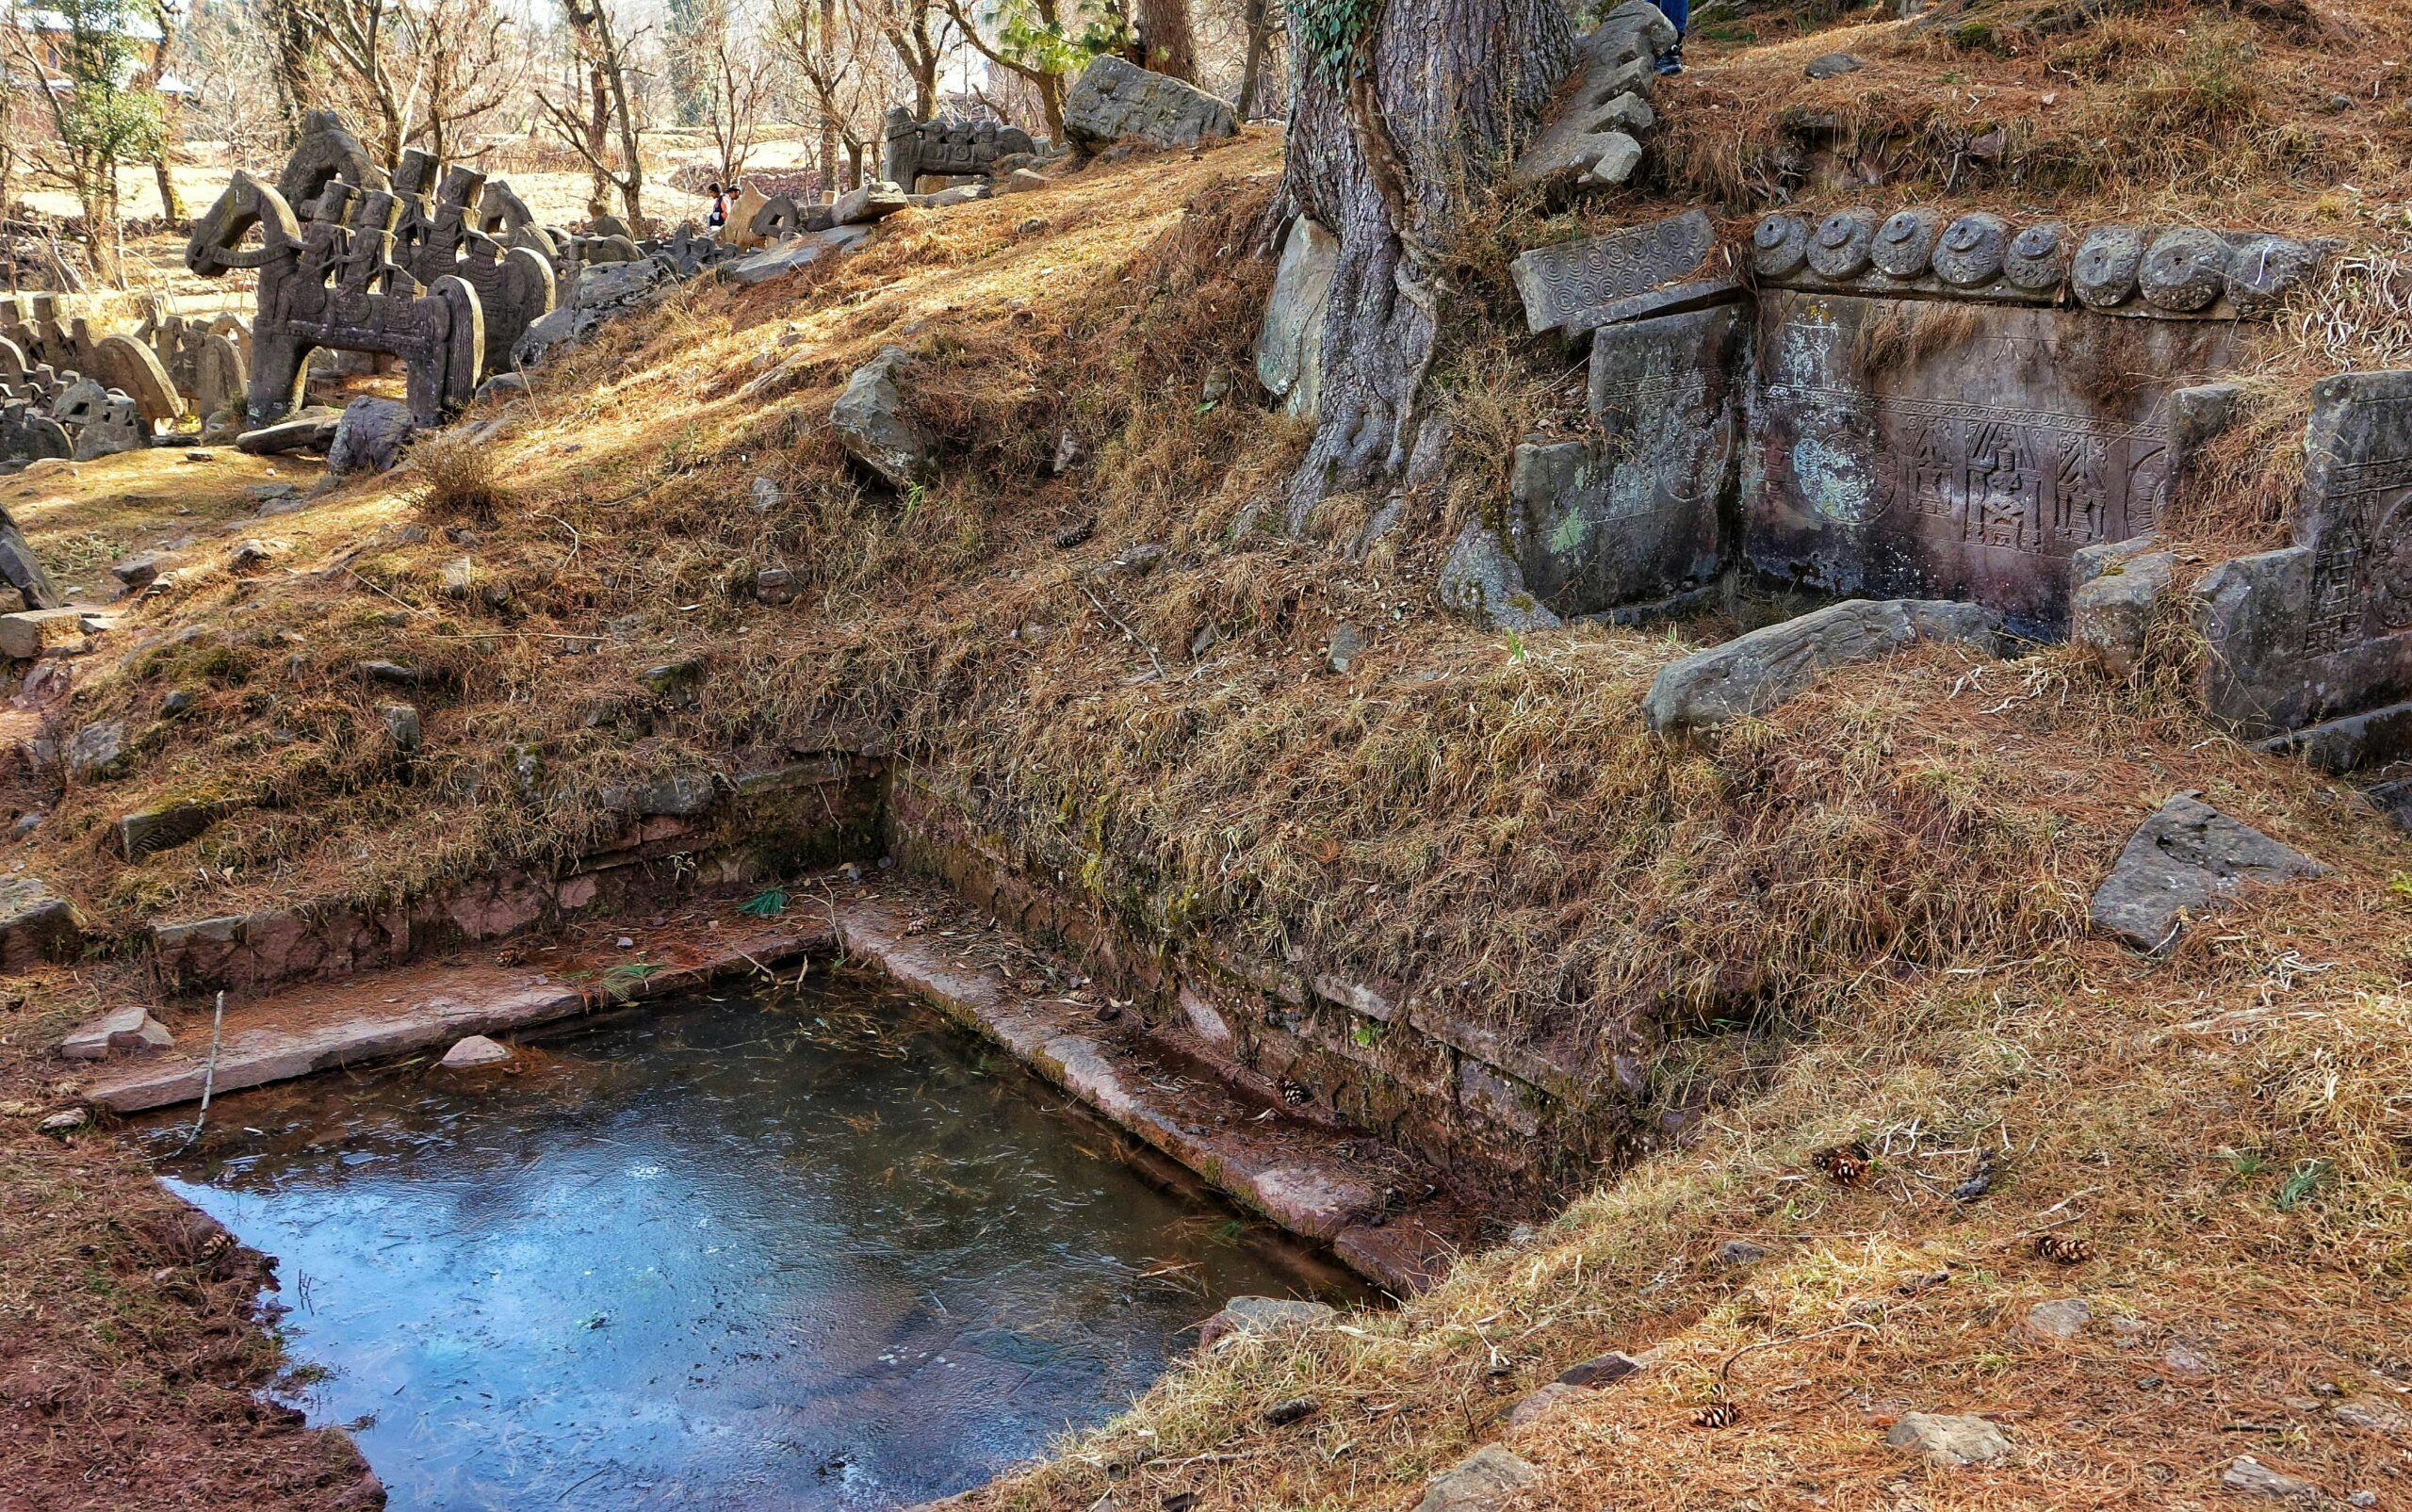 A semi frozen pond on the site fed by a natural spring